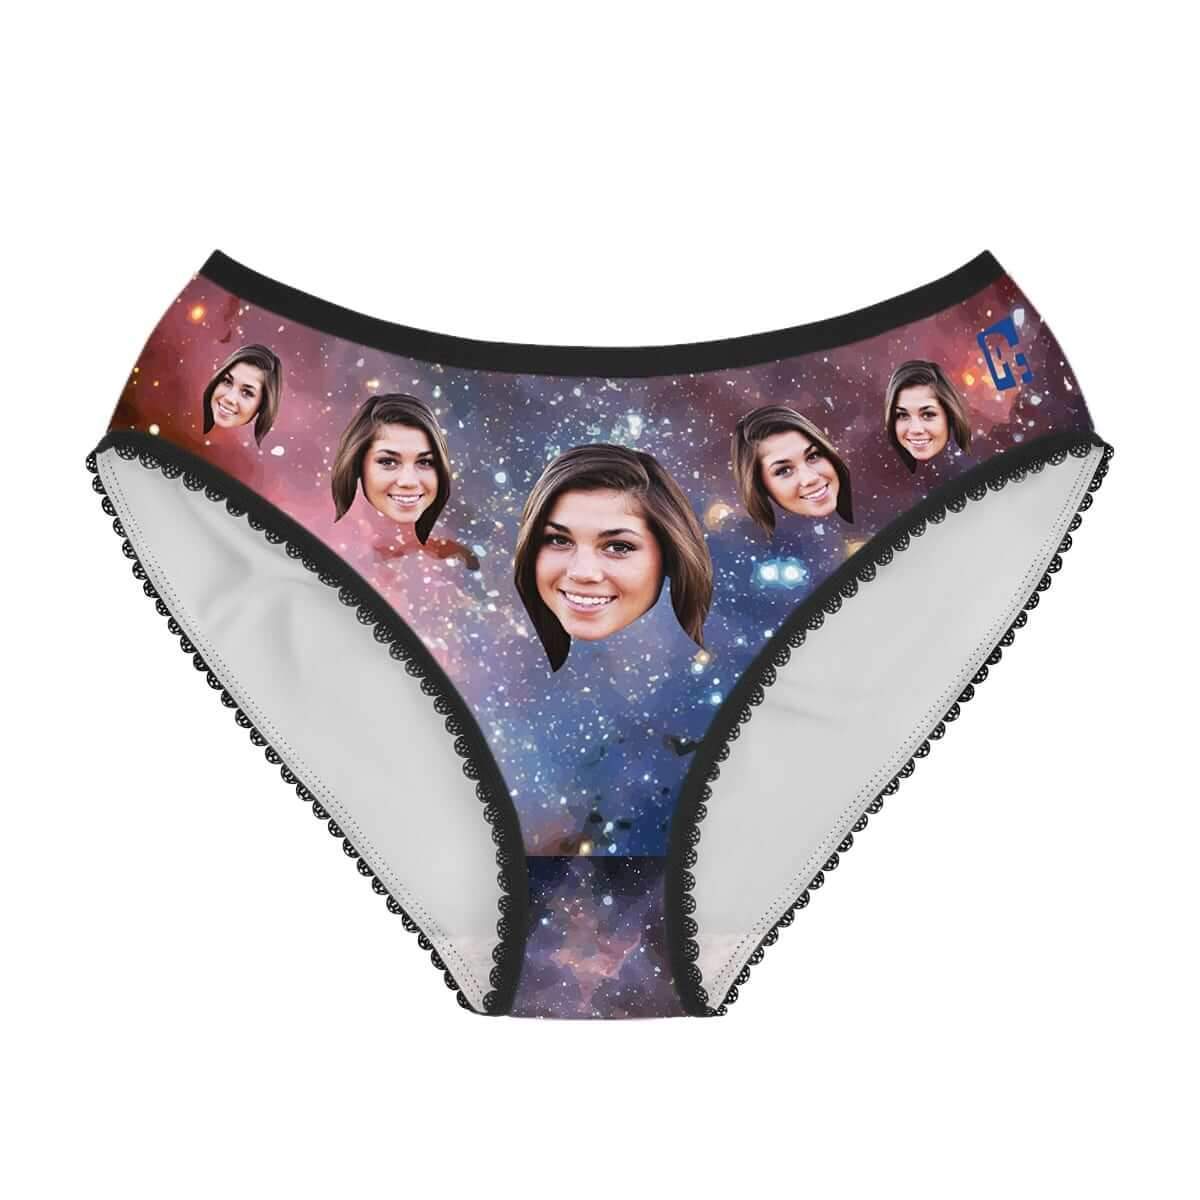 Galaxy Galaxy women's underwear briefs personalized with photo printed on them